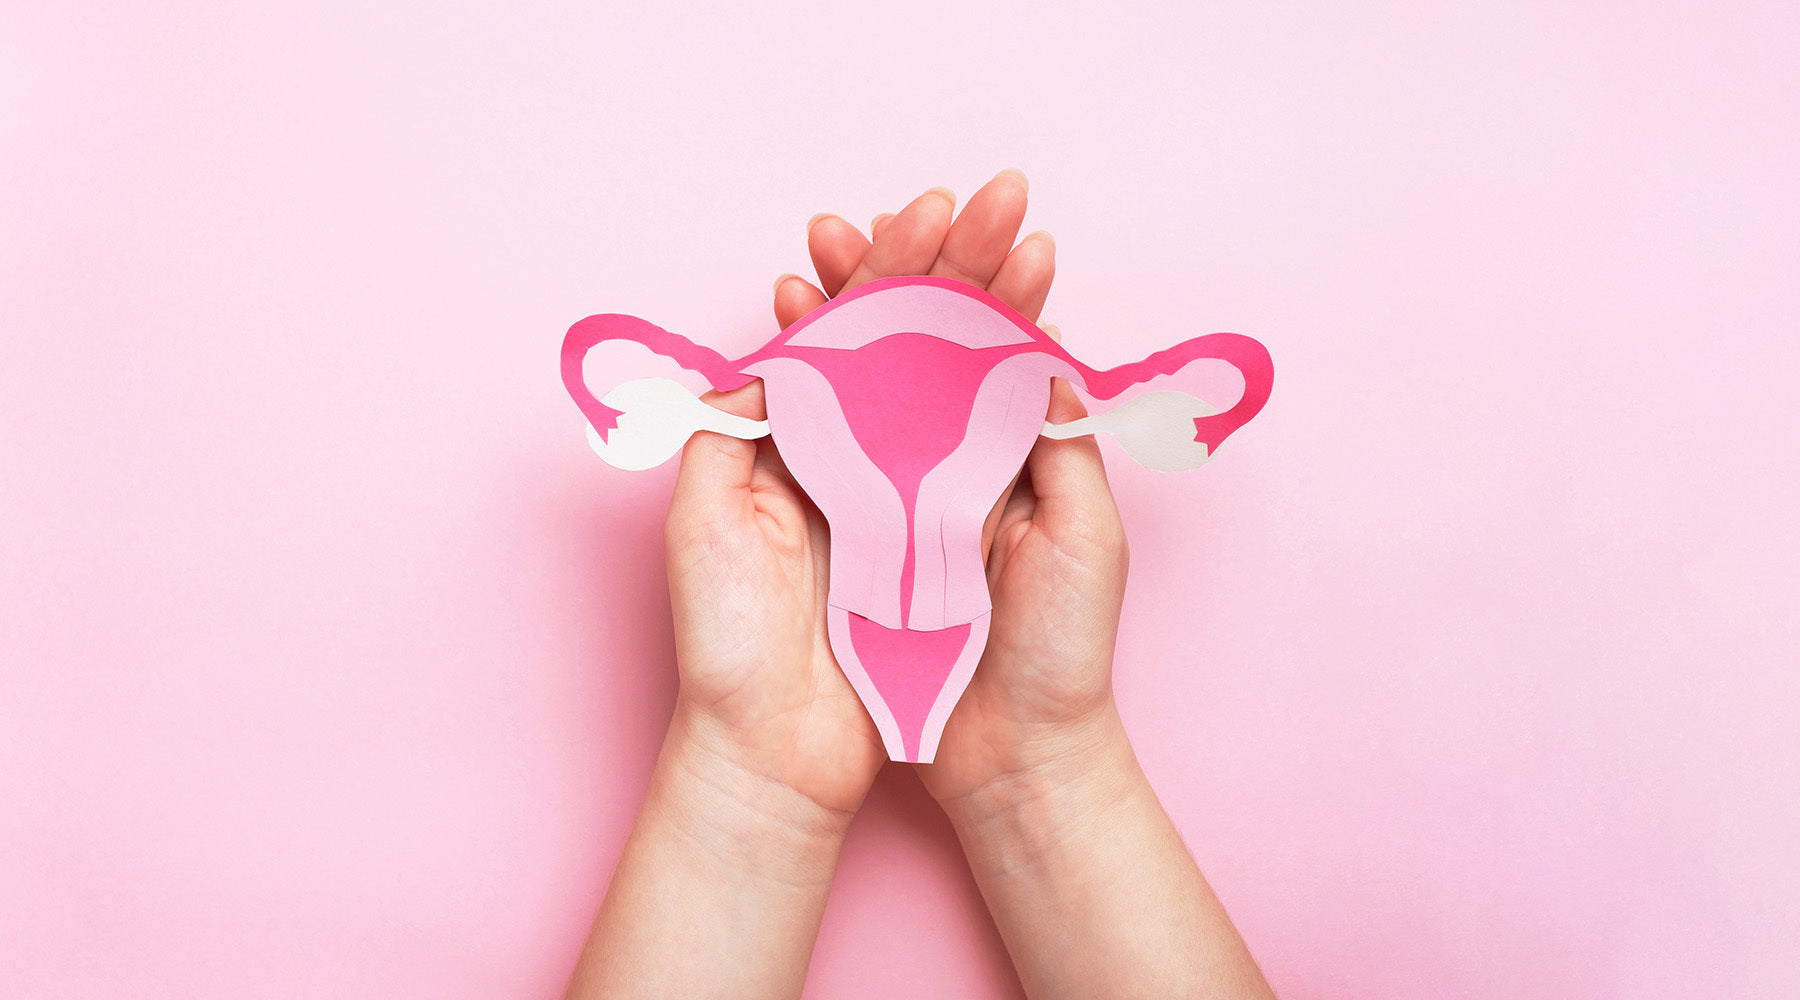 What Women Should Know About Their Ovaries